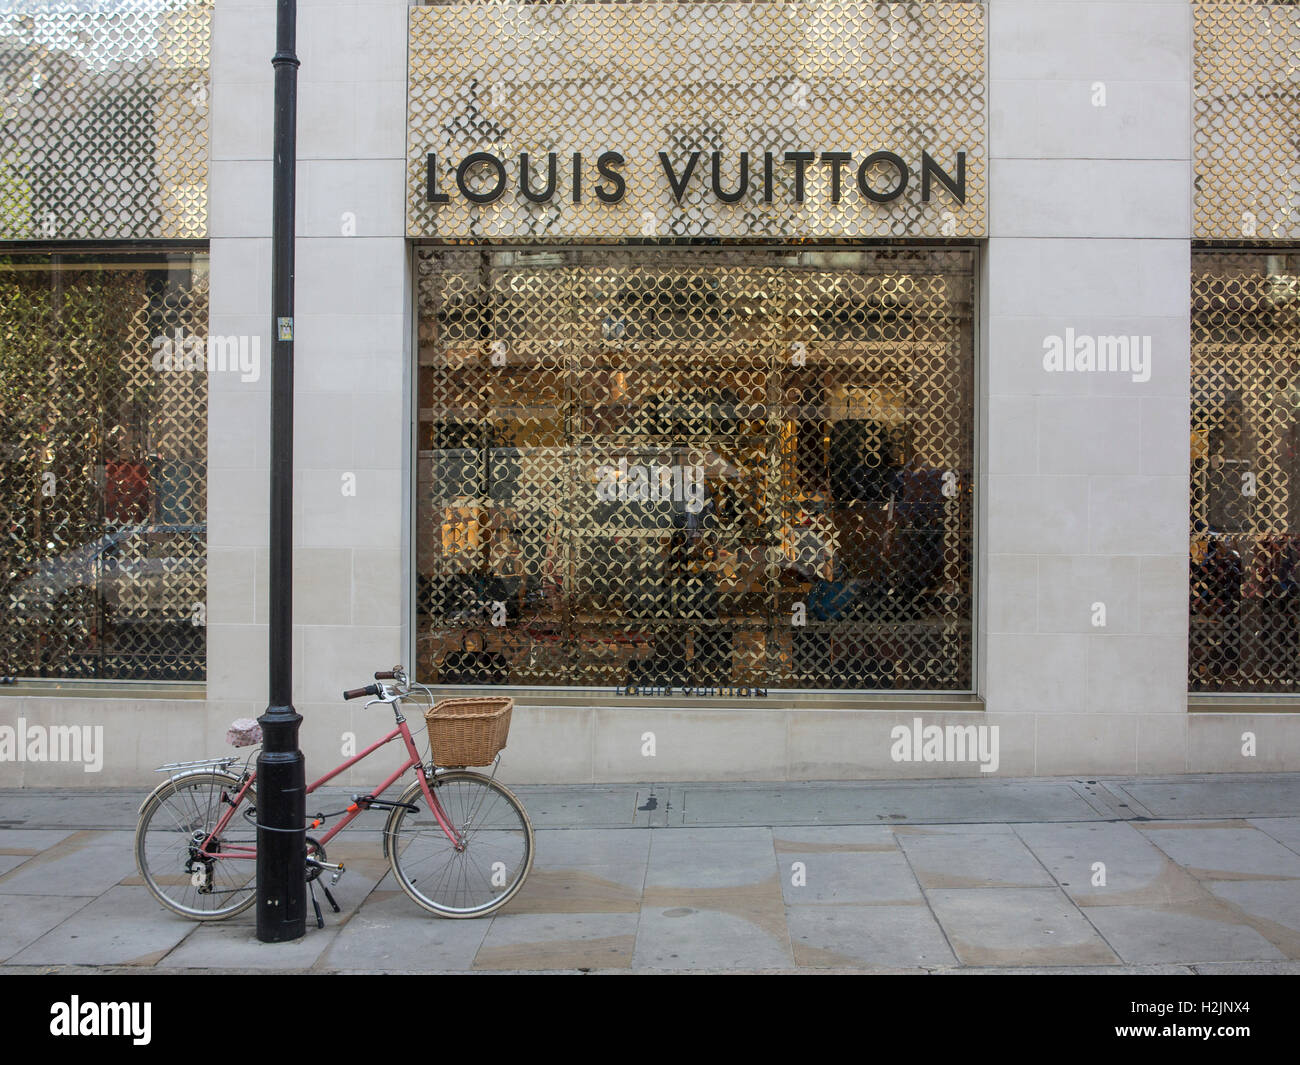 A pink bicycle parked outside a Louis Vuitton shop in London Stock Photo: 122114220 - Alamy